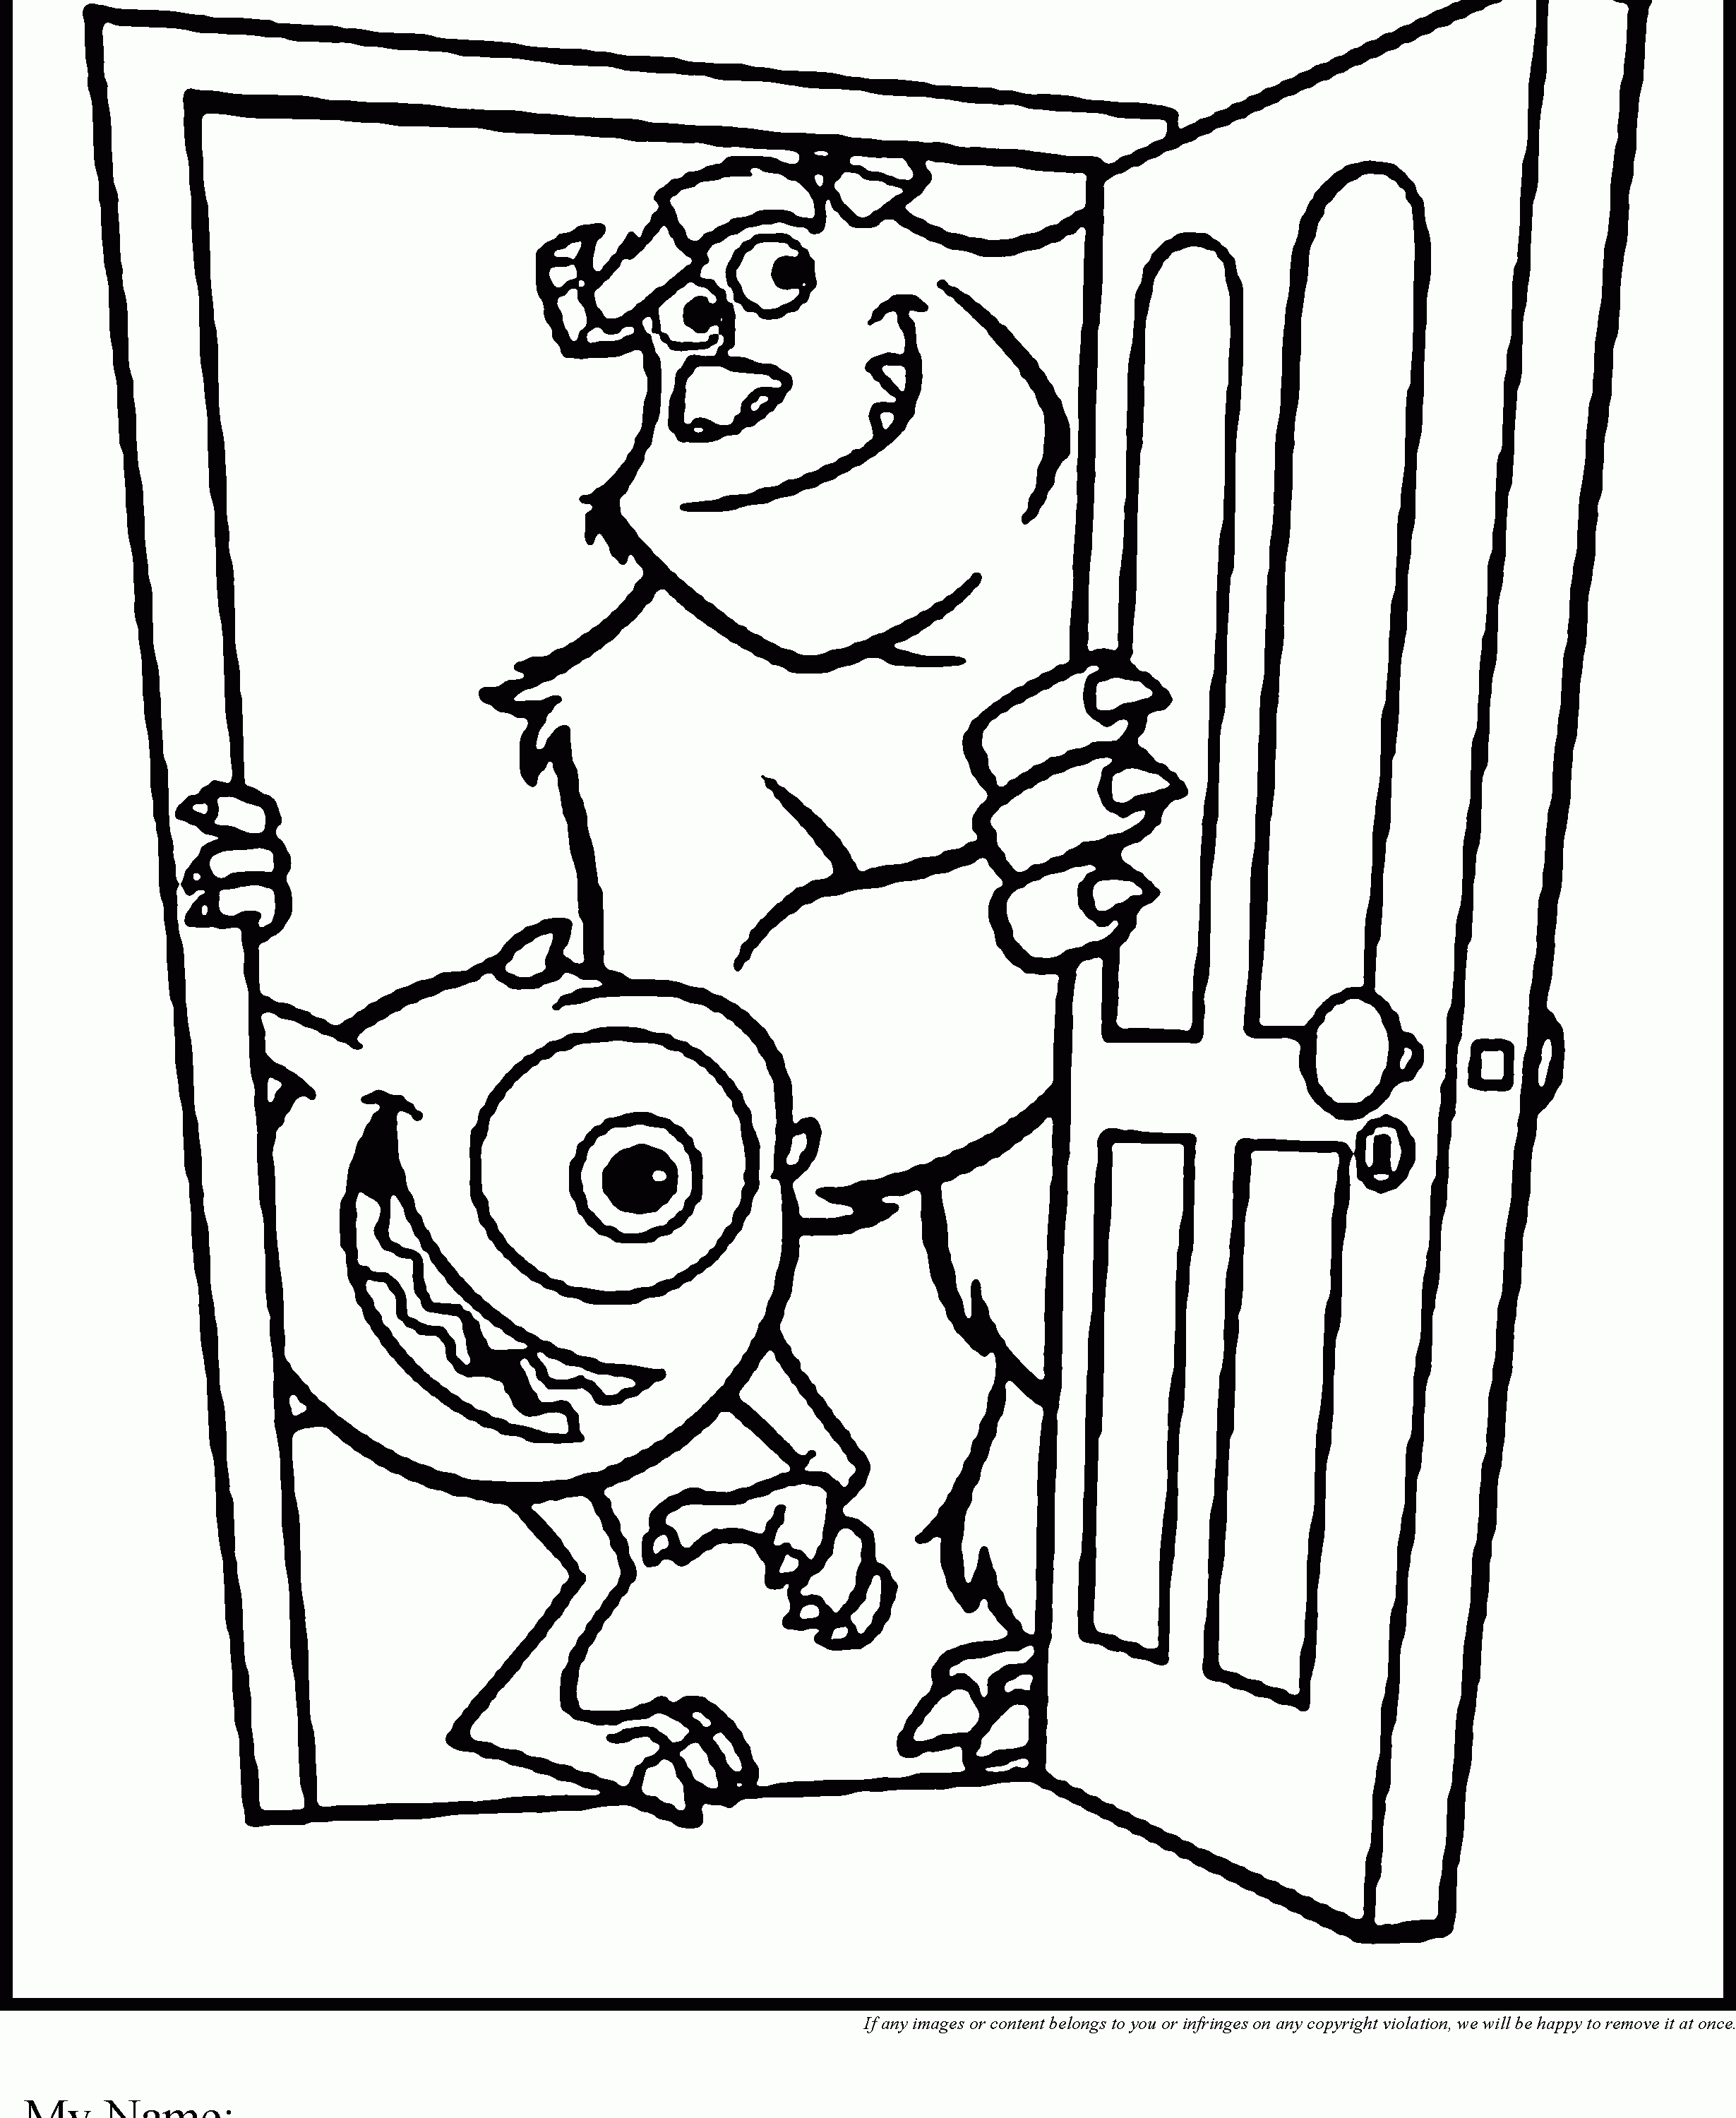 Mike Monsters Inc Coloring Pages, monsters inc coloring pages mike ...